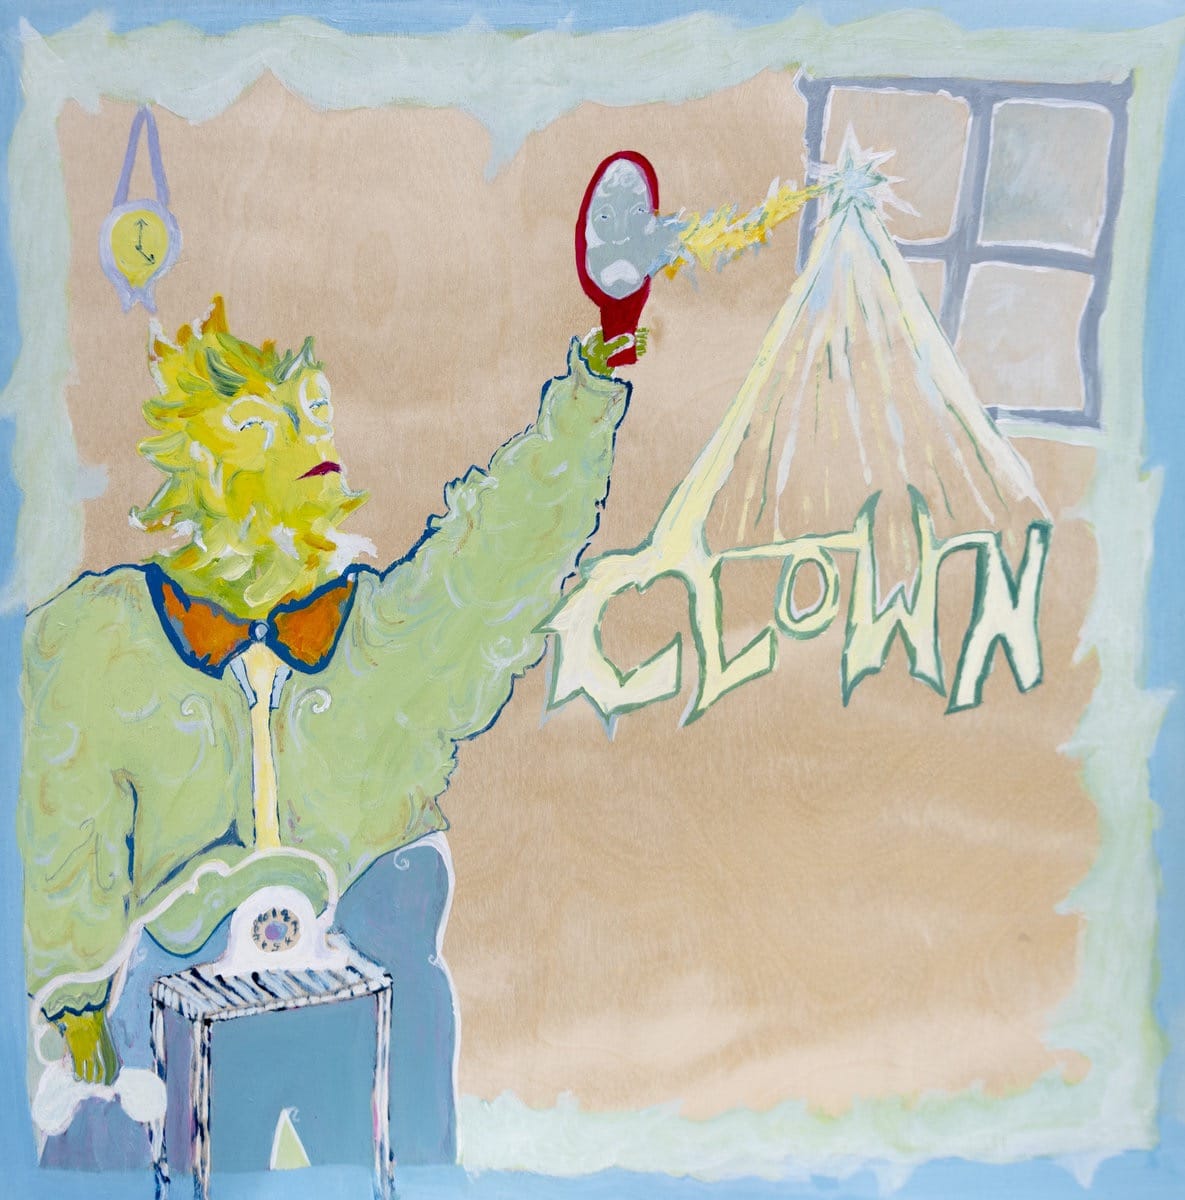 Cover art for clown by dogworld. Record all music & vocals: Infidel Studios